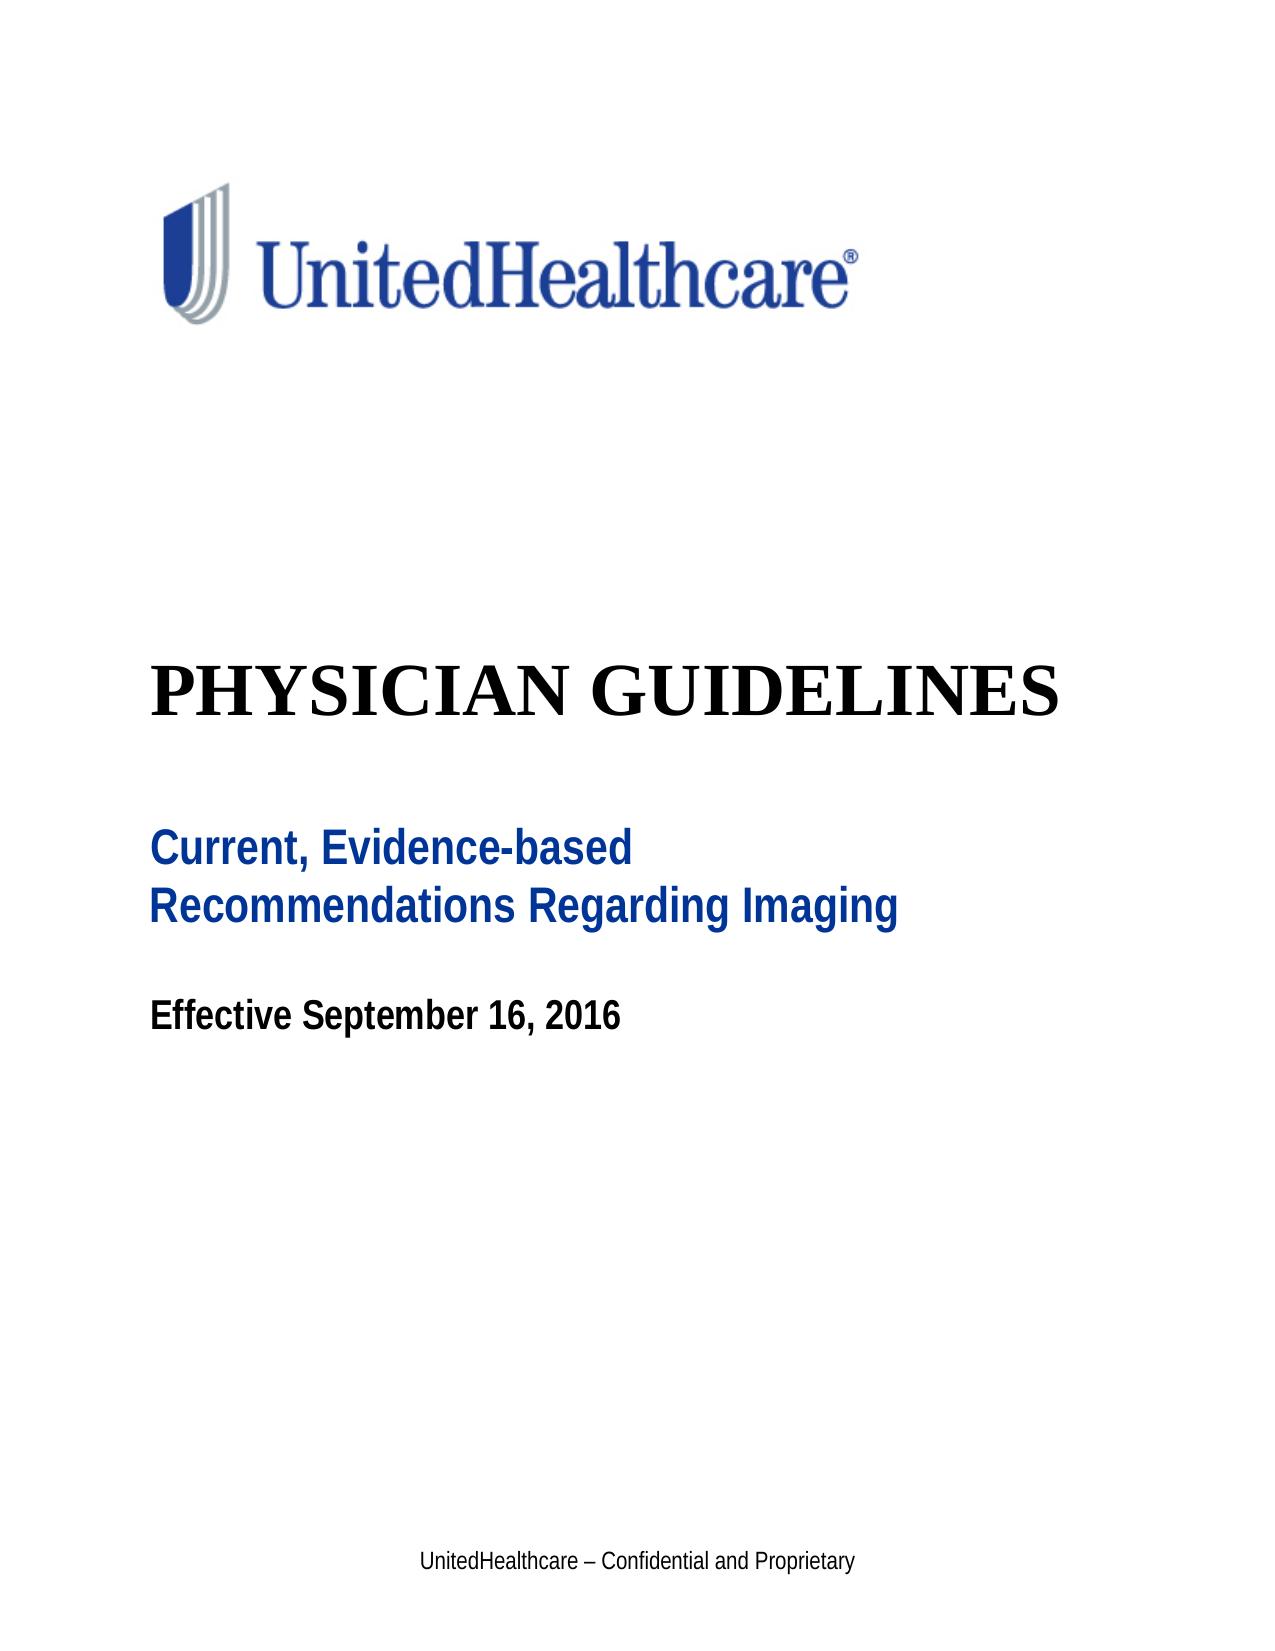 PHYSICIAN GUIDELINES CURRENT Evidence-Based